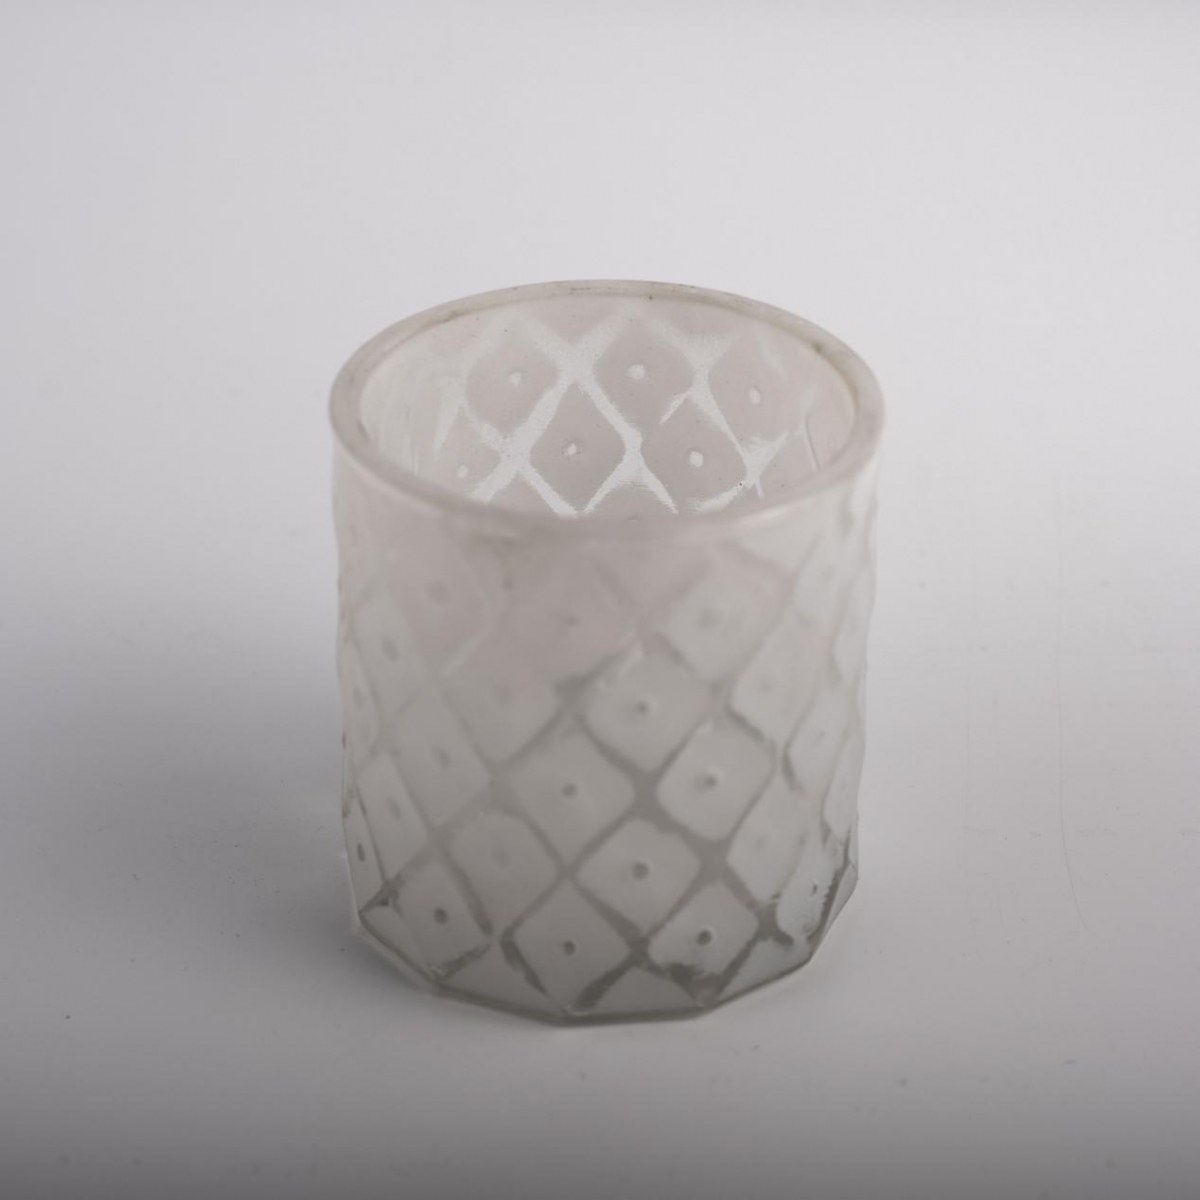 Candle Holder ：Ceramic White  , Diamond Lattice , Polished Glass Jar  , Home Sweet Home , China Factory Price-HOWCANDLE-Candles,Scented Candles,Aromatherapy Candles,Soy Candles,Vegan Candles,Jar Candles,Pillar Candles,Candle Gift Sets,Essential Oils,Reed Diffuser,Candle Holder,